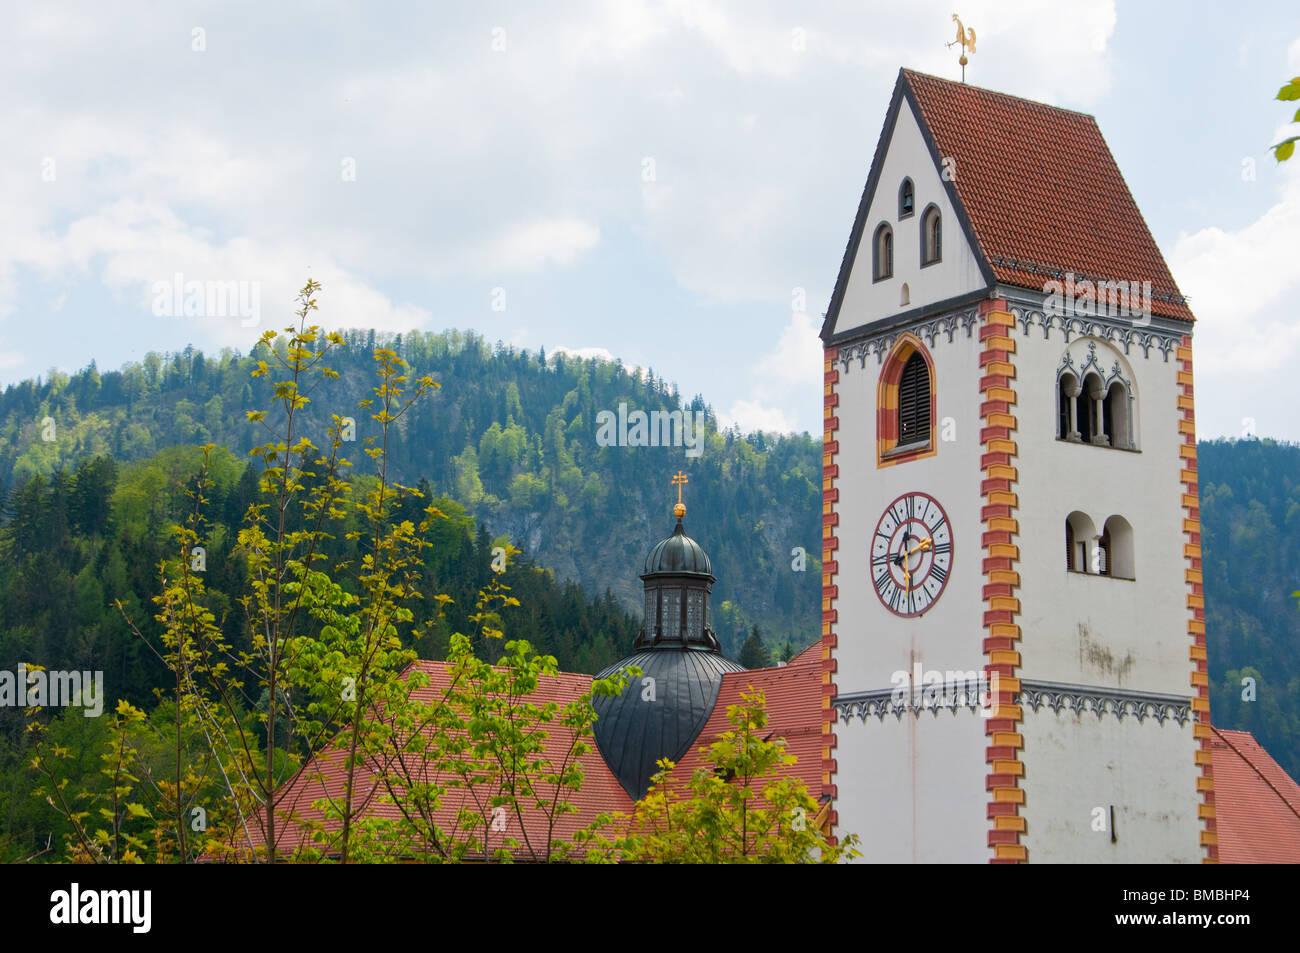 The Monastery of St Mang with clock tower in  Füssen, Bavaria, Germany Stock Photo